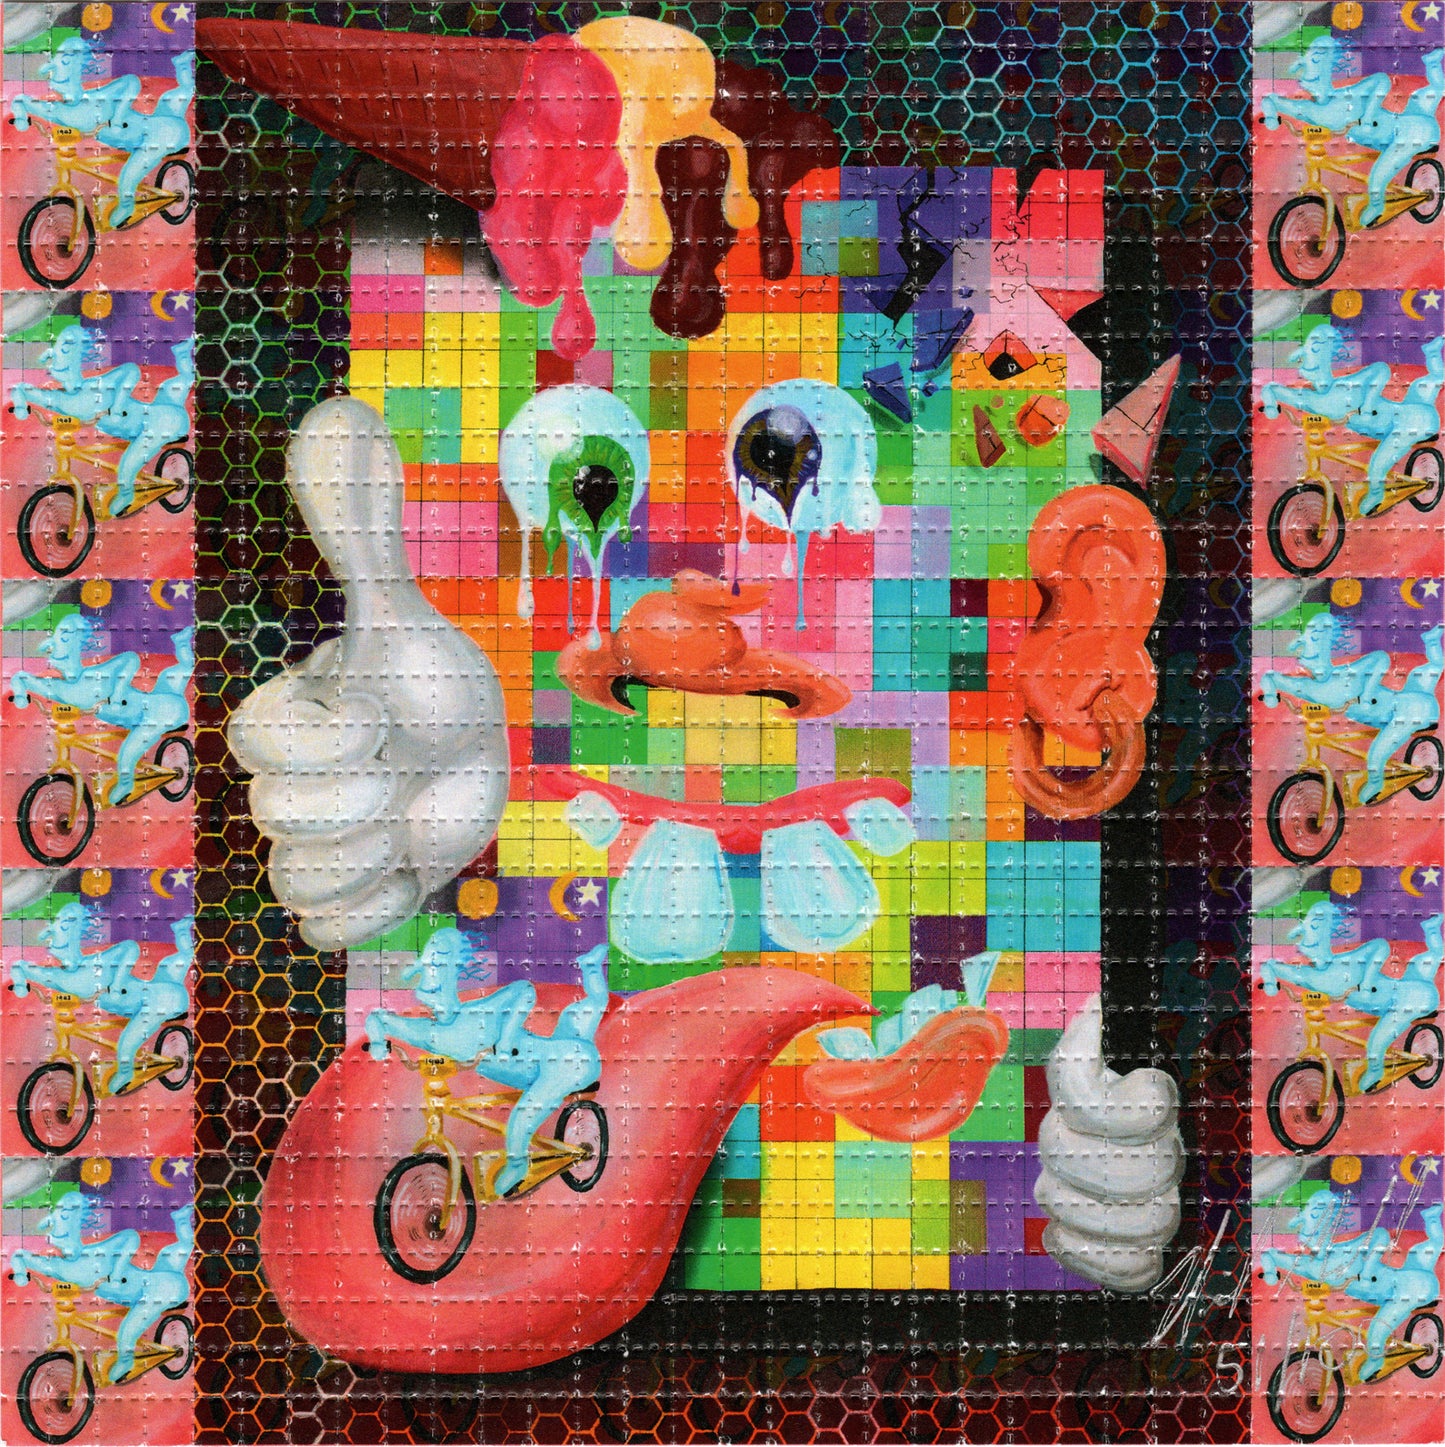 Don't Worry You're Good by Nicholas Melnik SIGNED Limited Edition LSD blotter art print